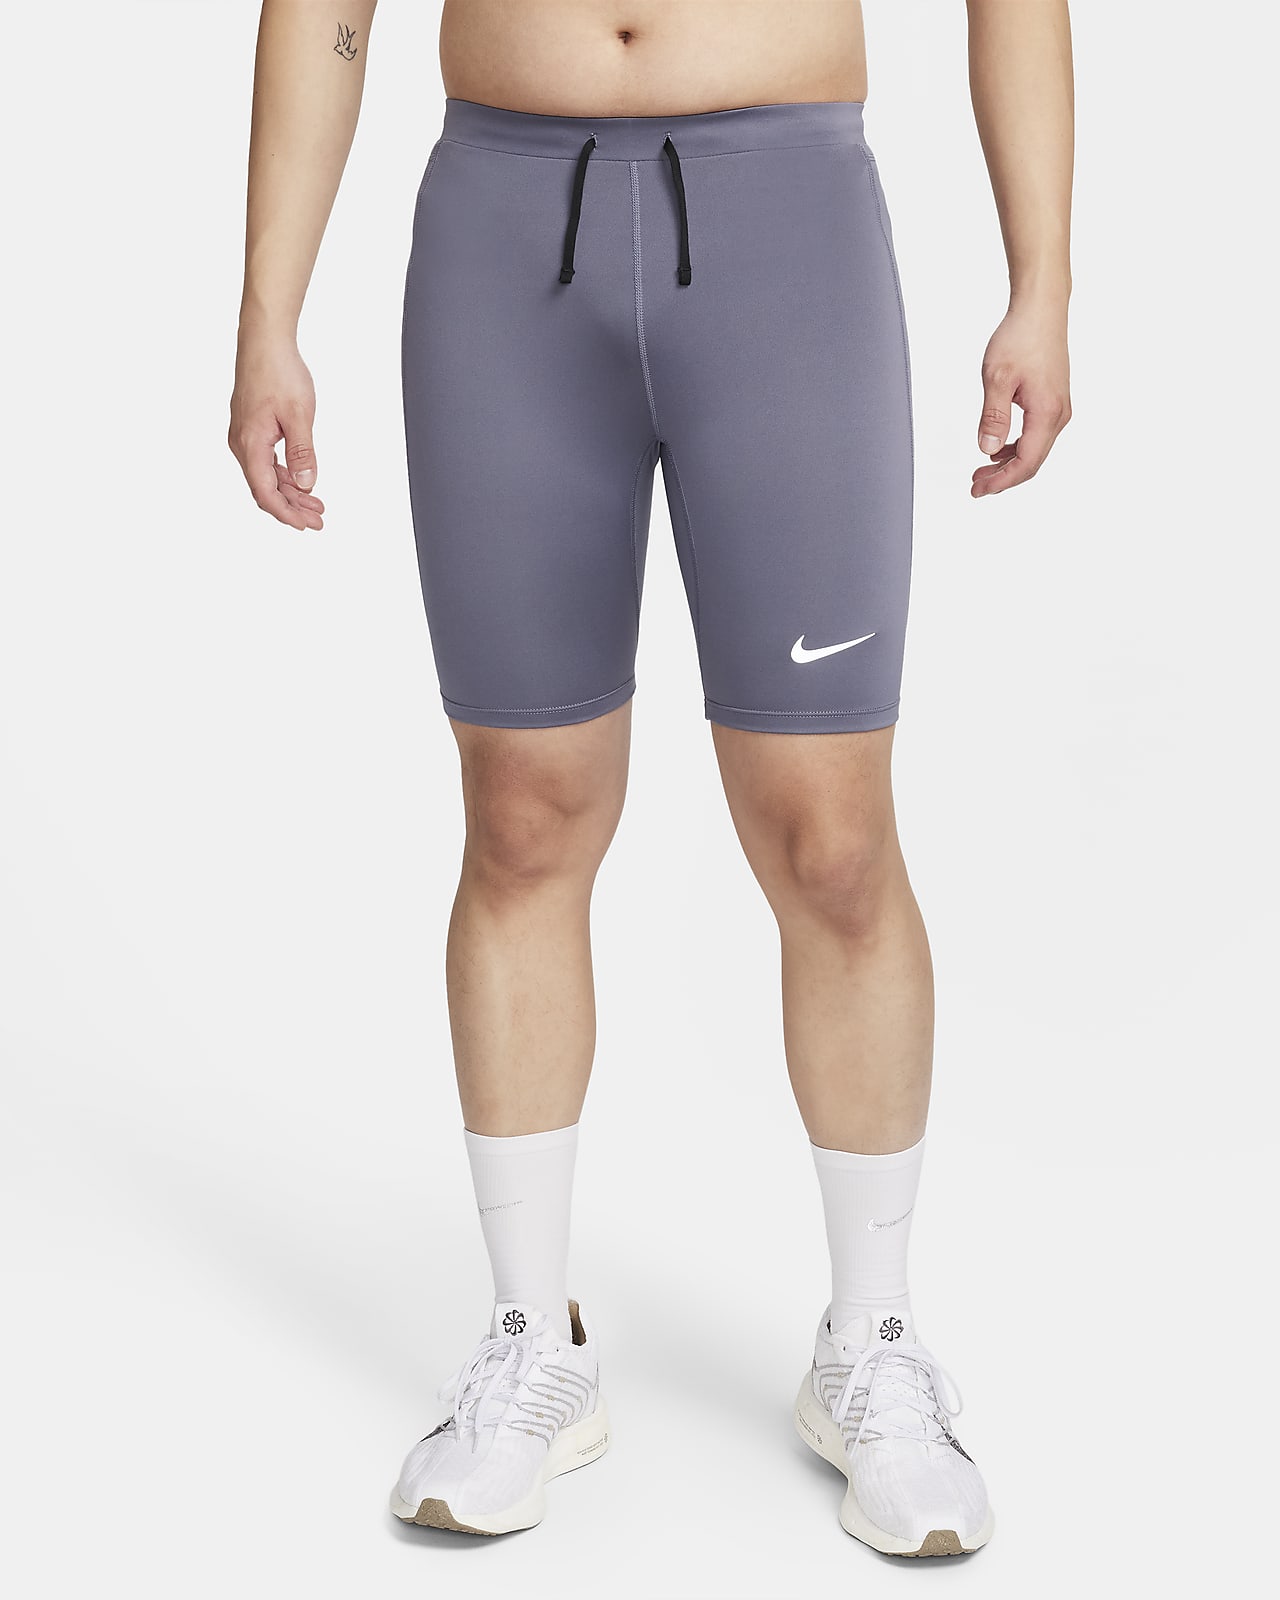 https://static.nike.com/a/images/t_PDP_1280_v1/f_auto,q_auto:eco/0b55fd32-c727-493d-a7cf-31cce9c9be62/fast-dri-fit-brief-lined-running-1-2-length-tights-KqRTPW.png